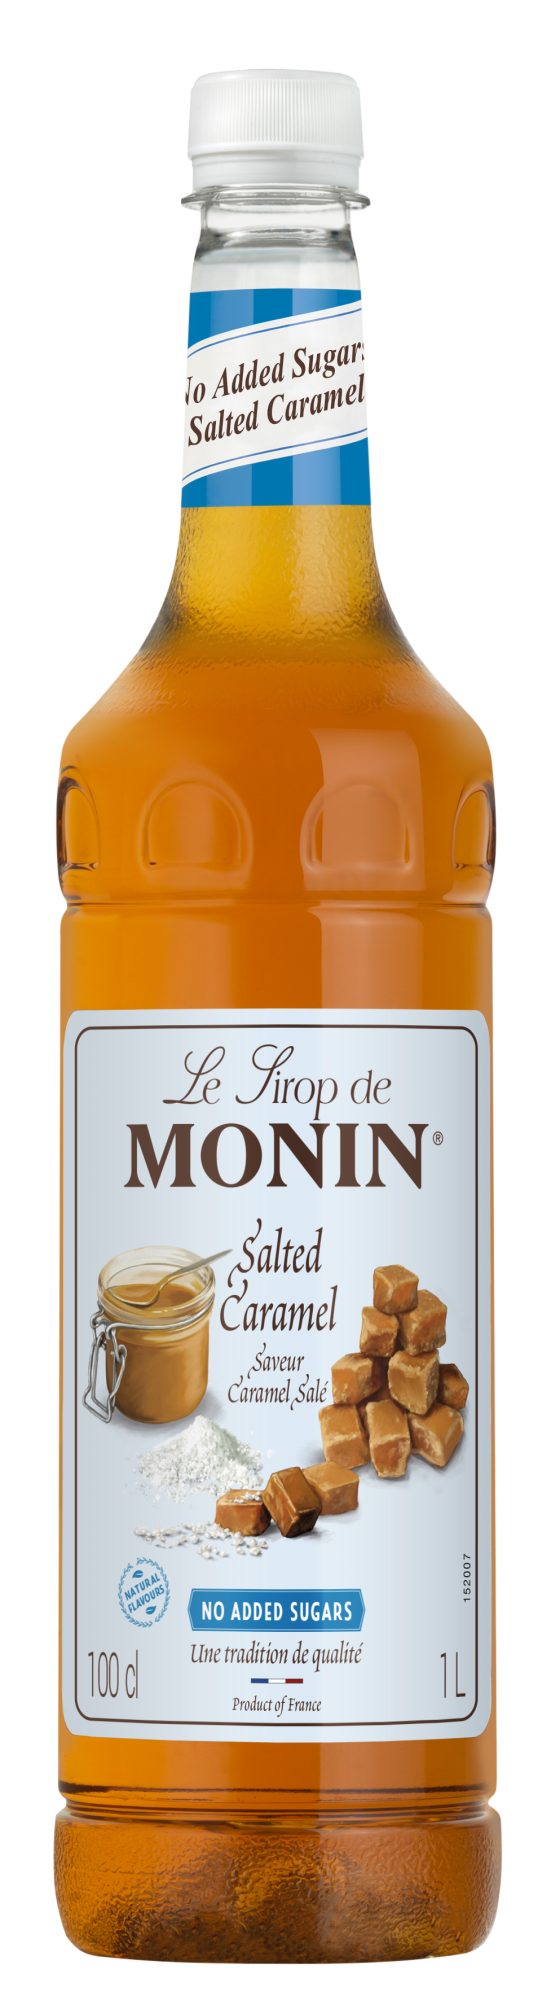 Buy MONIN Salted Caramel No Added Sugar syrup. It brings an added level of sophistication and flavour to all beverages.